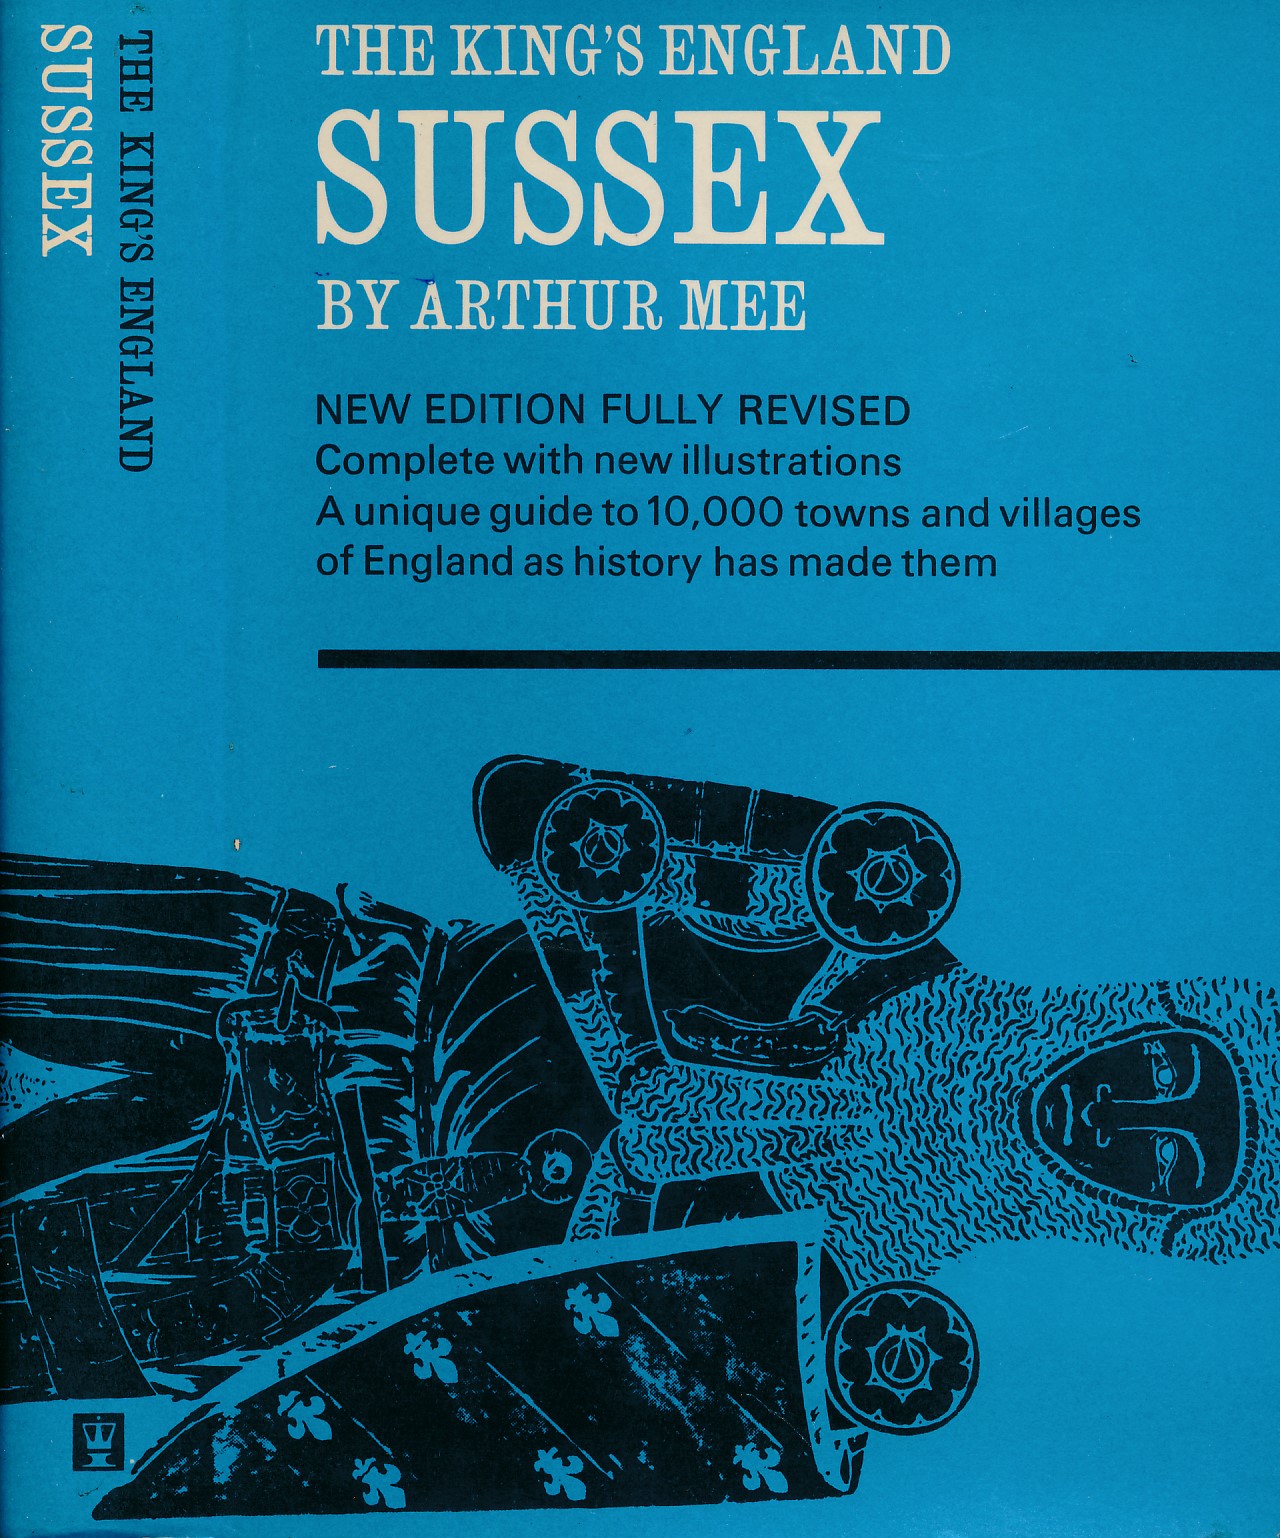 Sussex. The King's England.